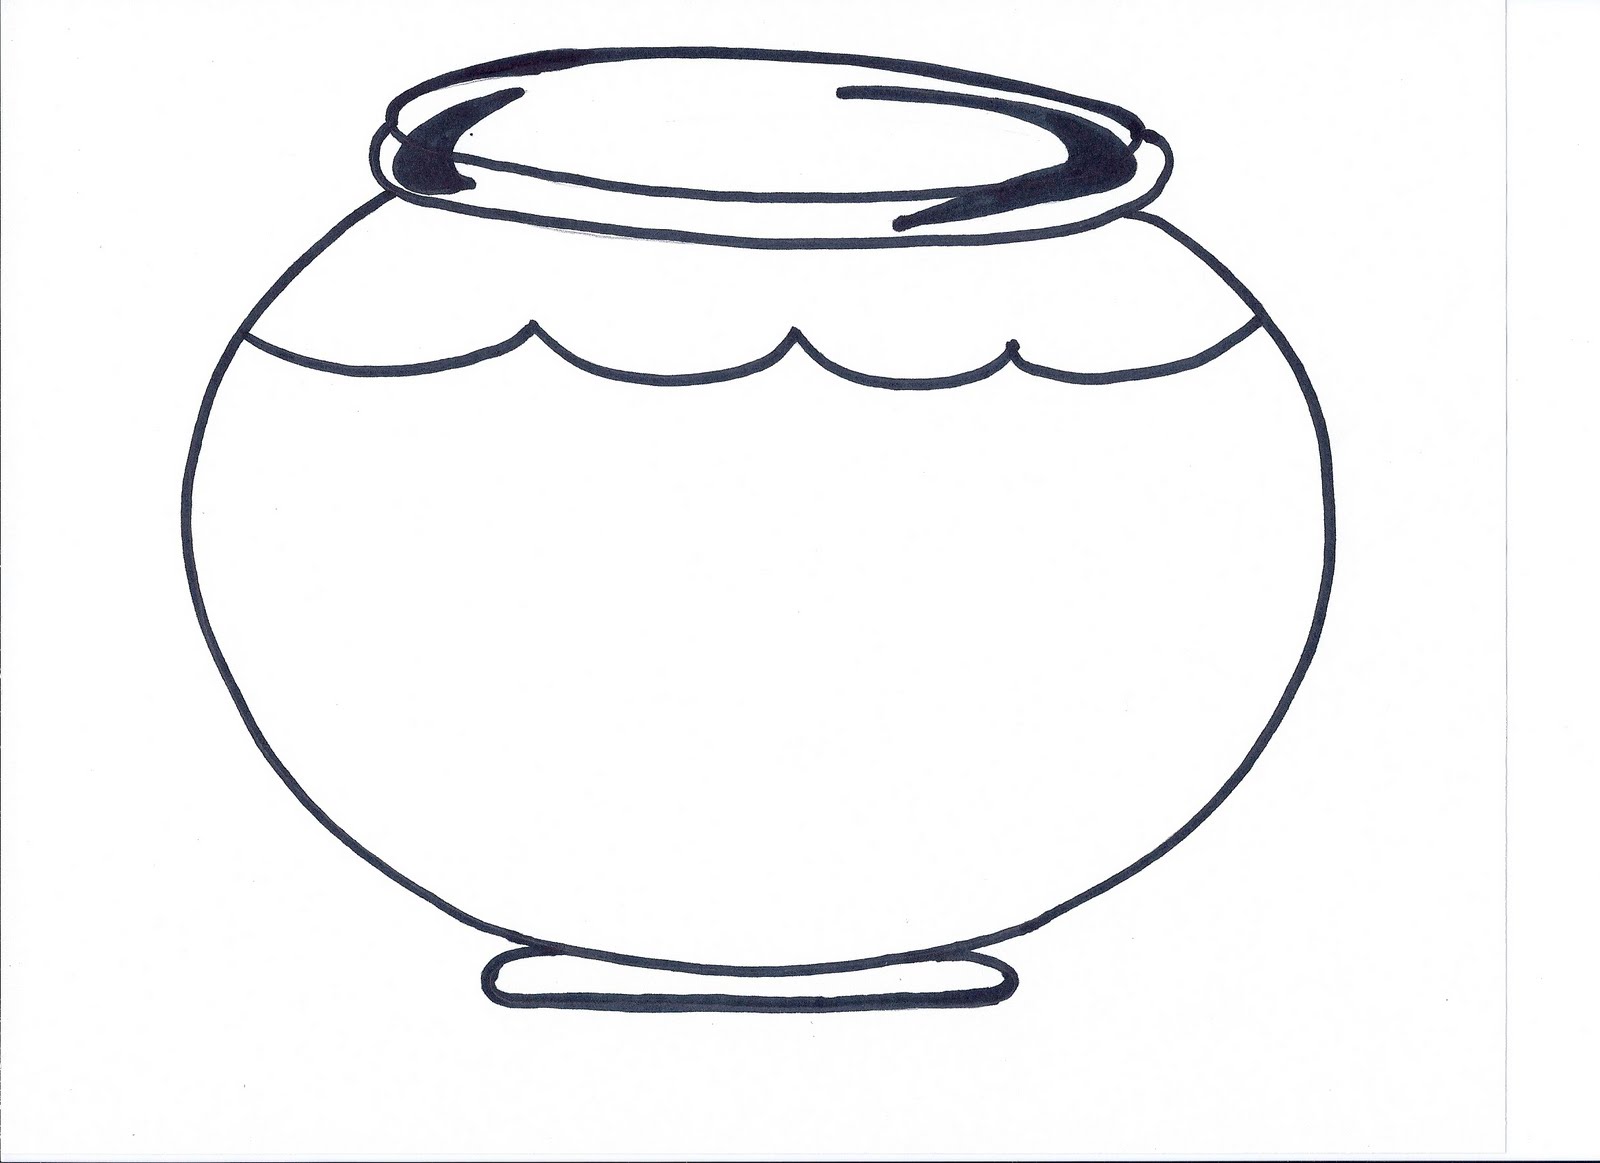 Printable Fish Bowl Template   Clipart Best